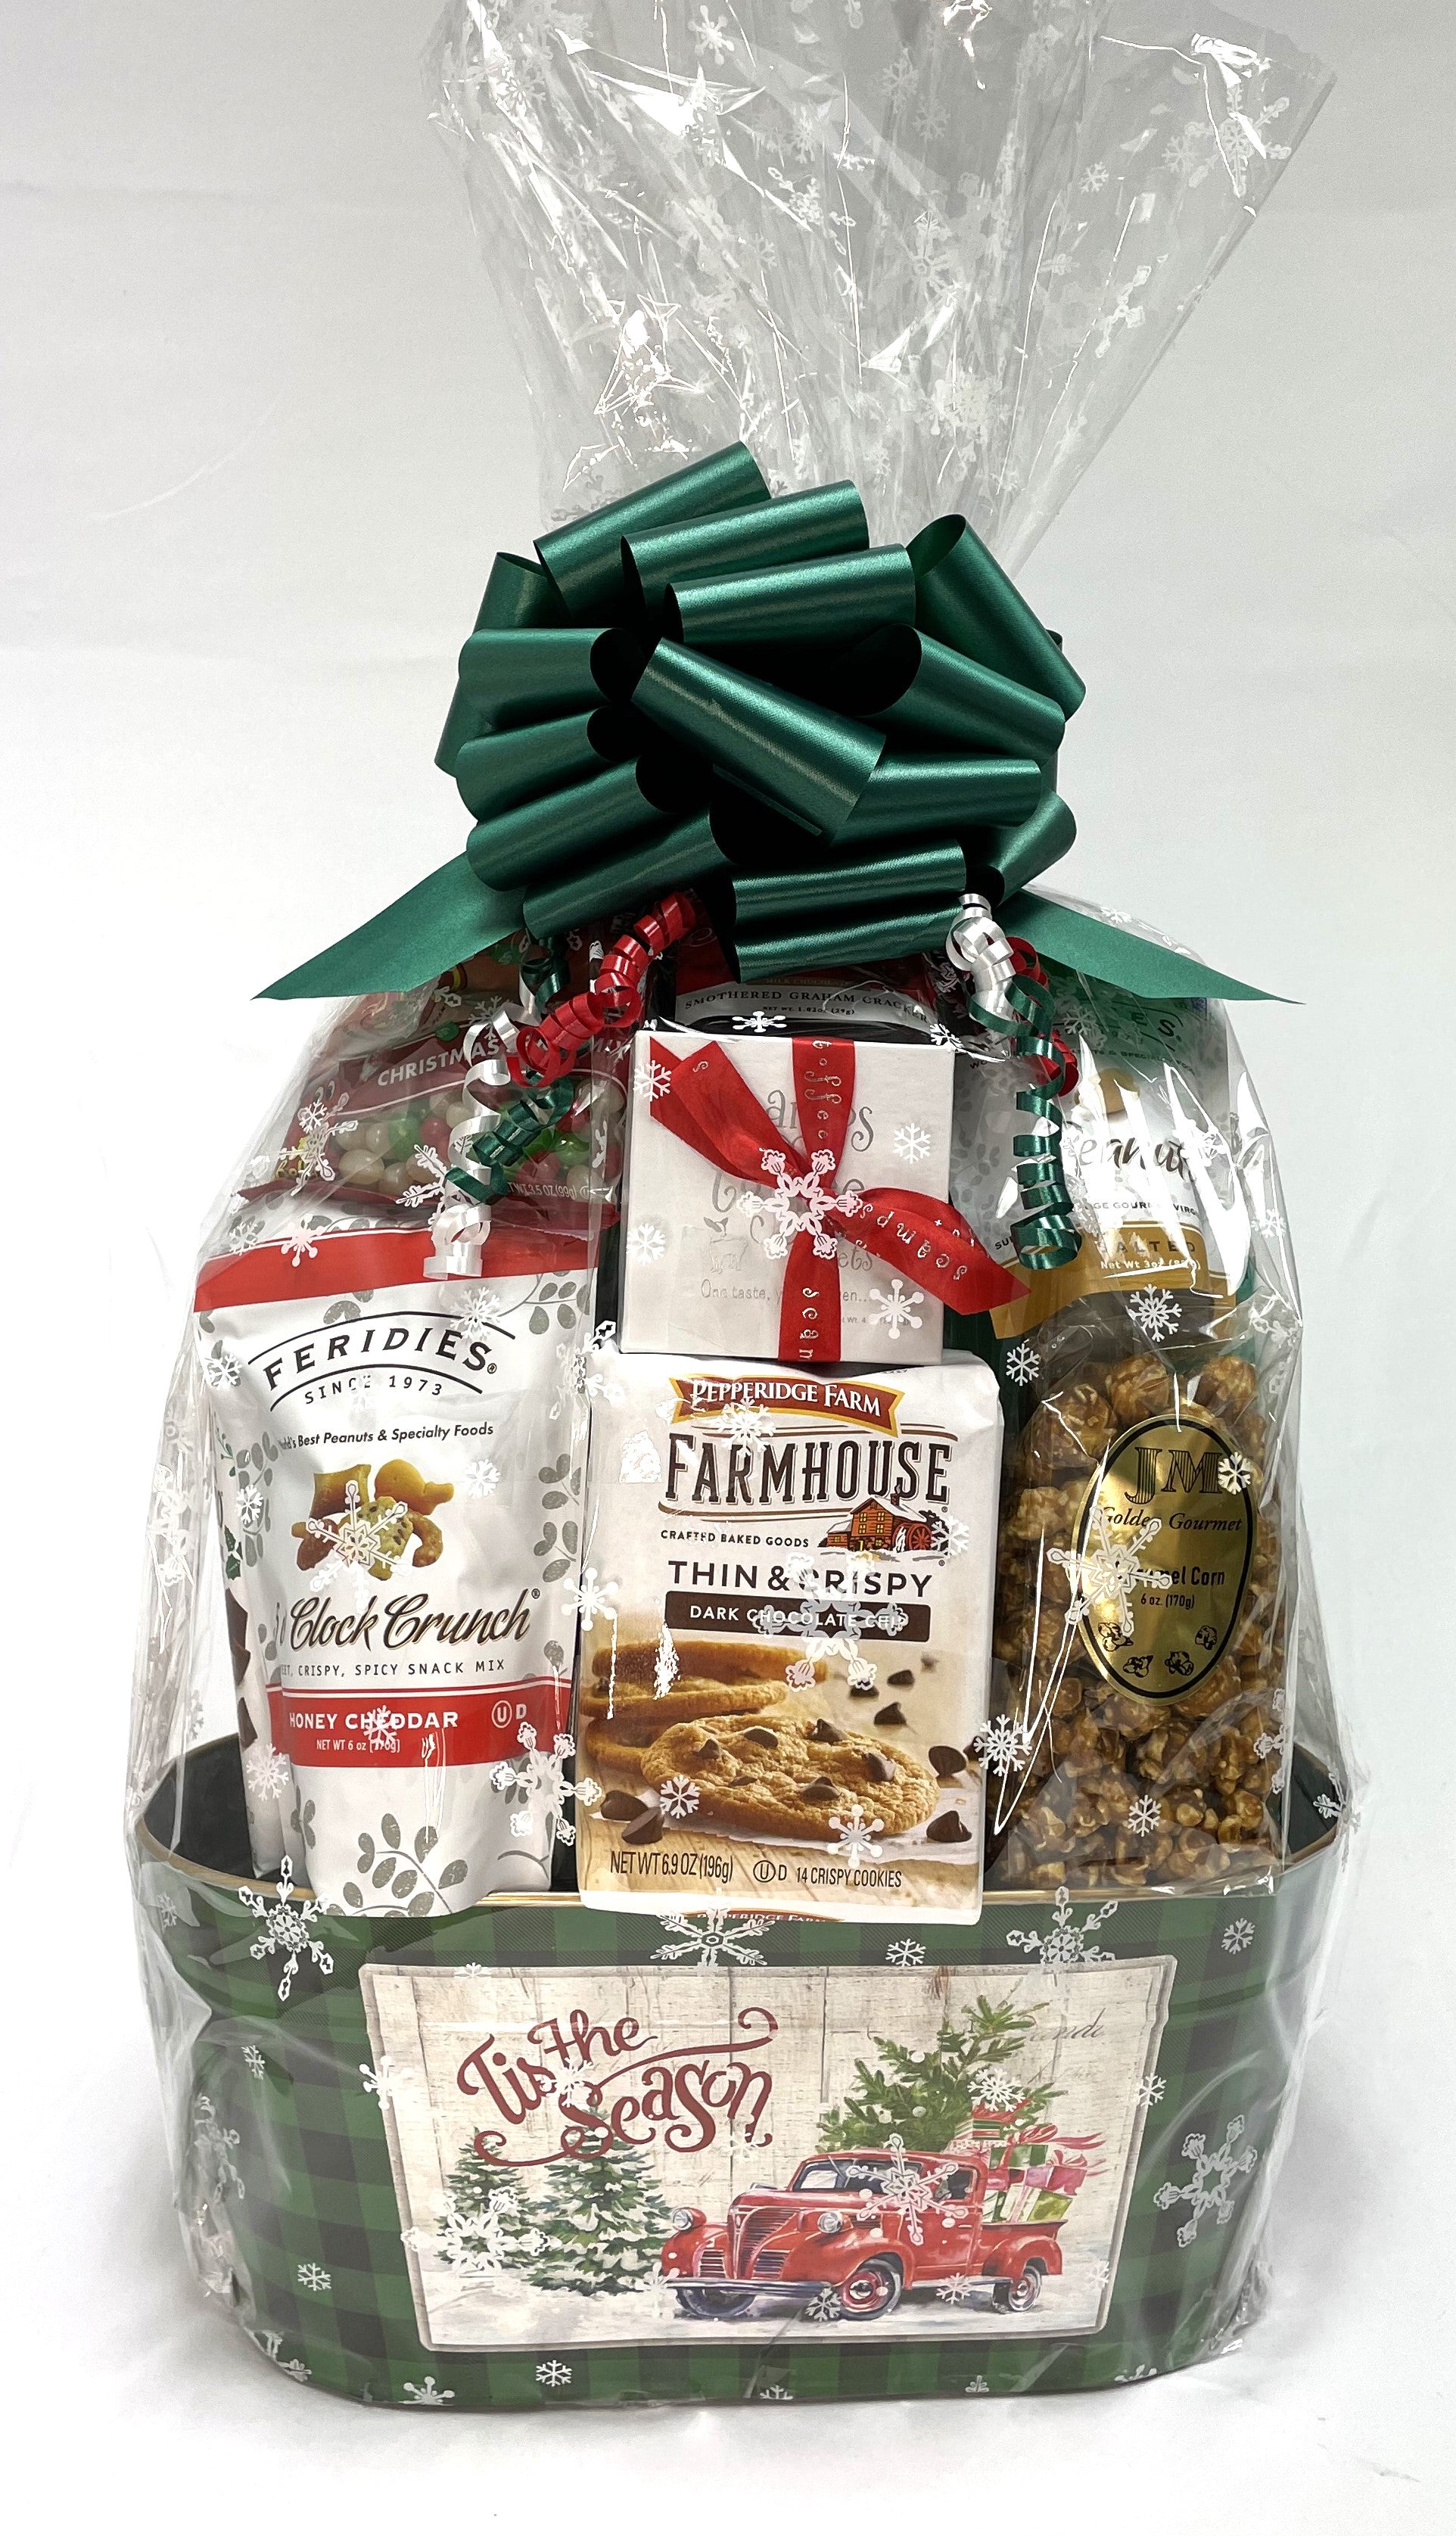 No Beer Quitting Gift Box – Jenny's Gift Baskets